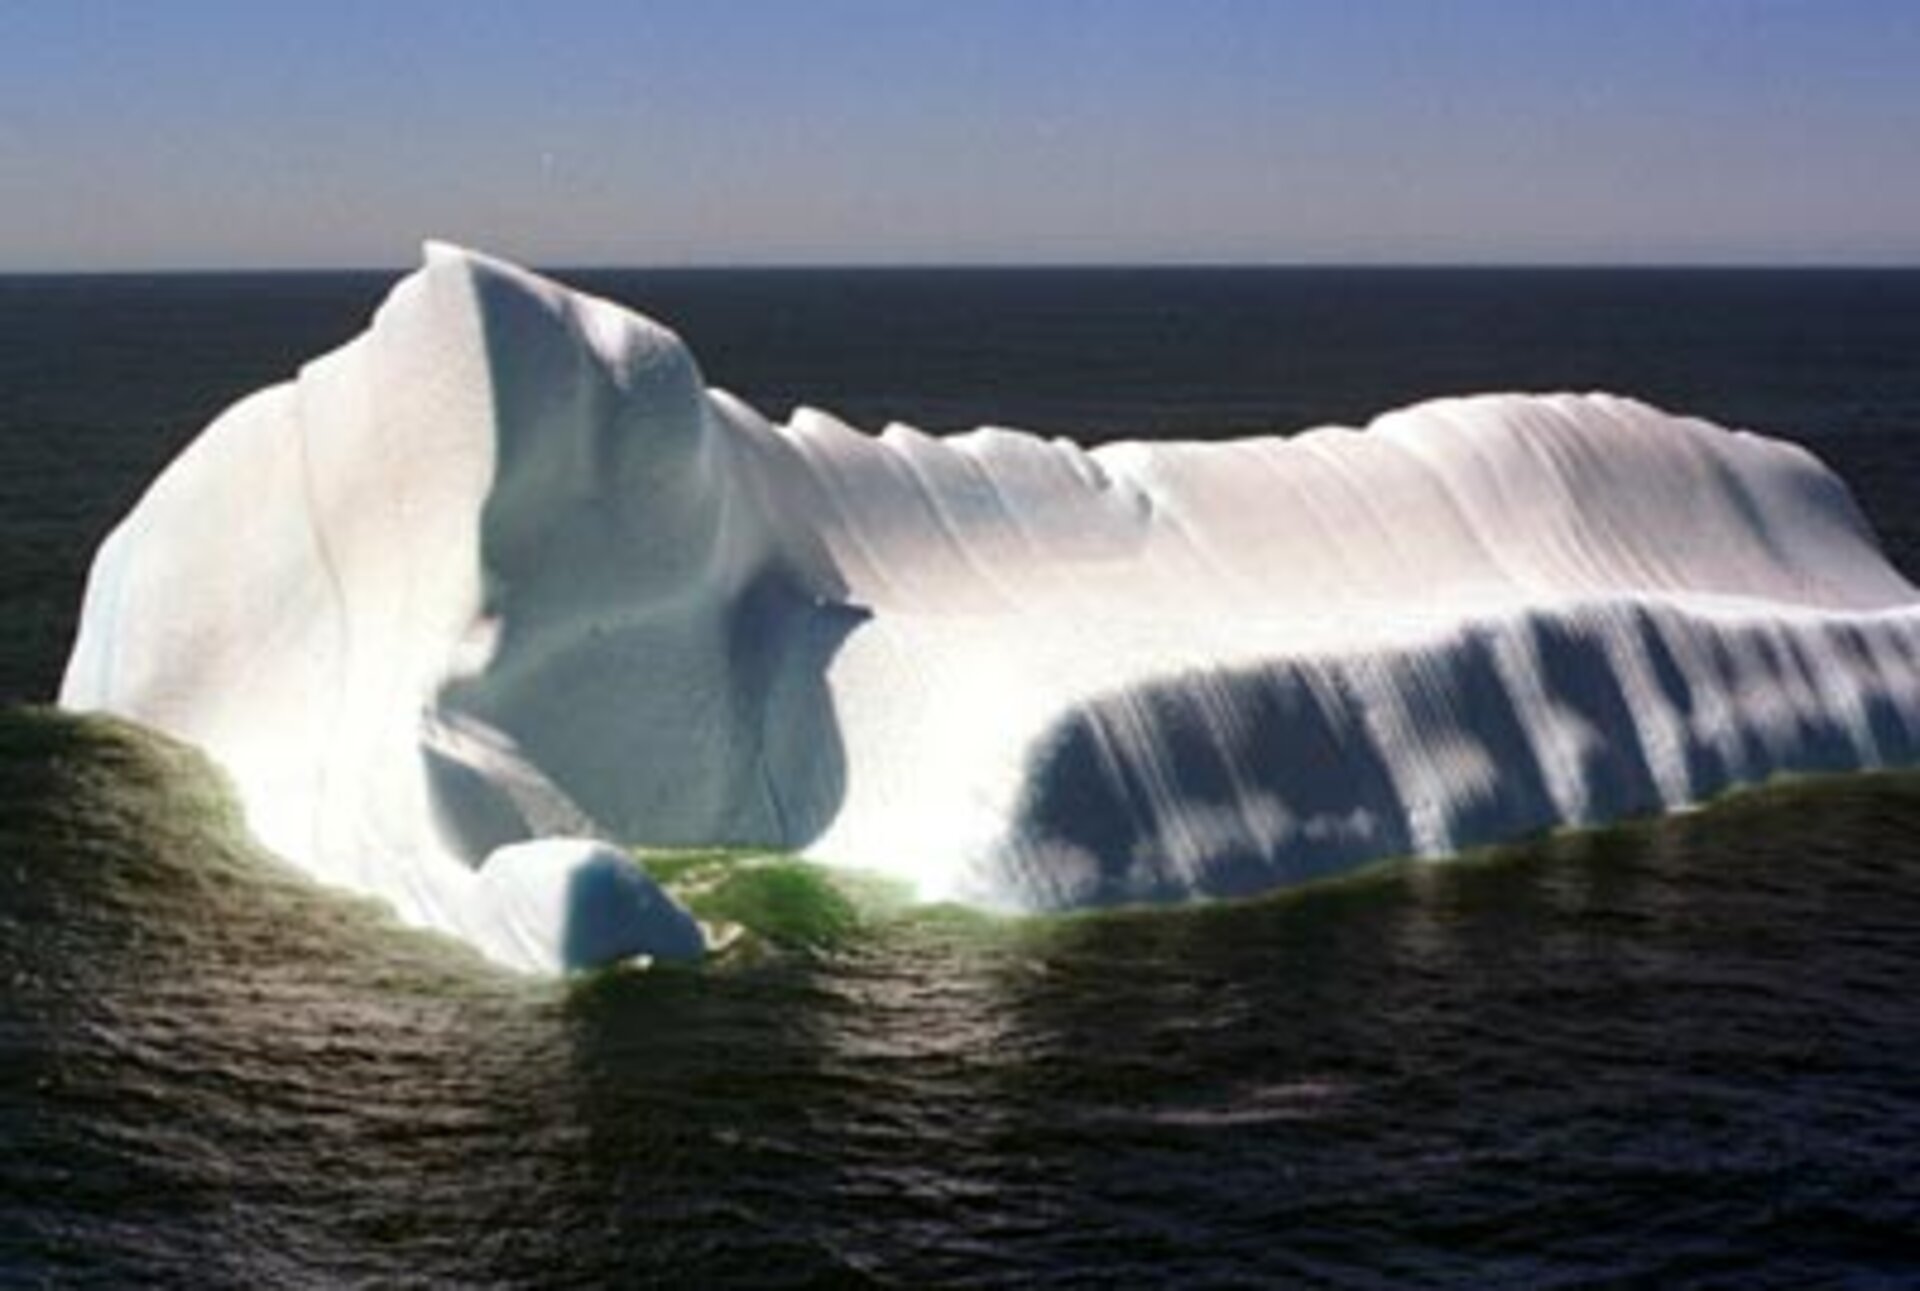 Iceberg monitoring is one service offered